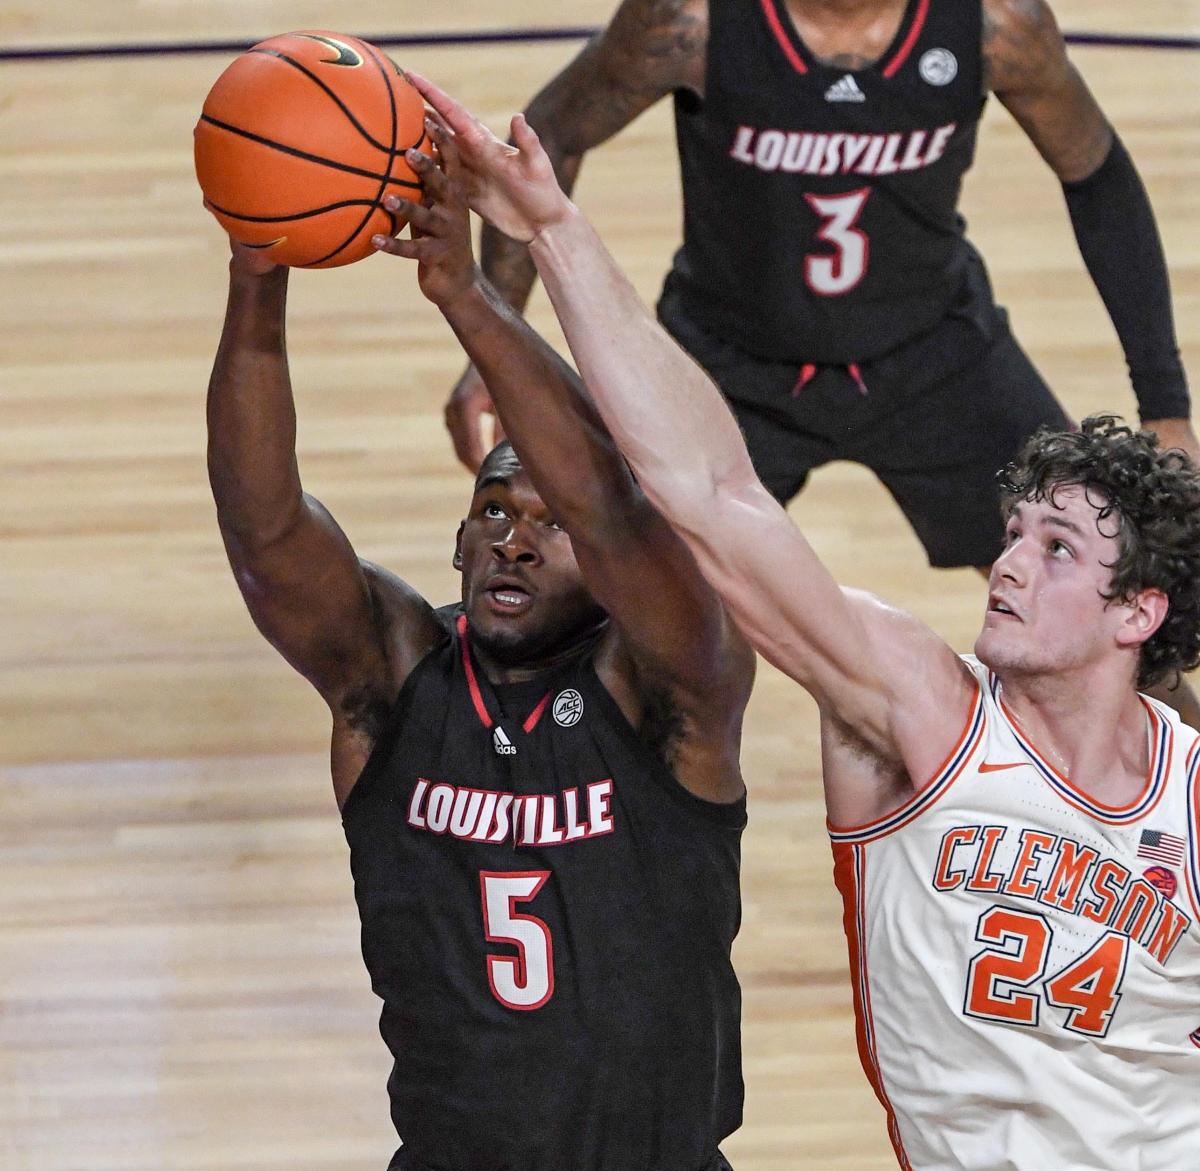 Louisville vs Clemson basketball game How to watch, stream and follow